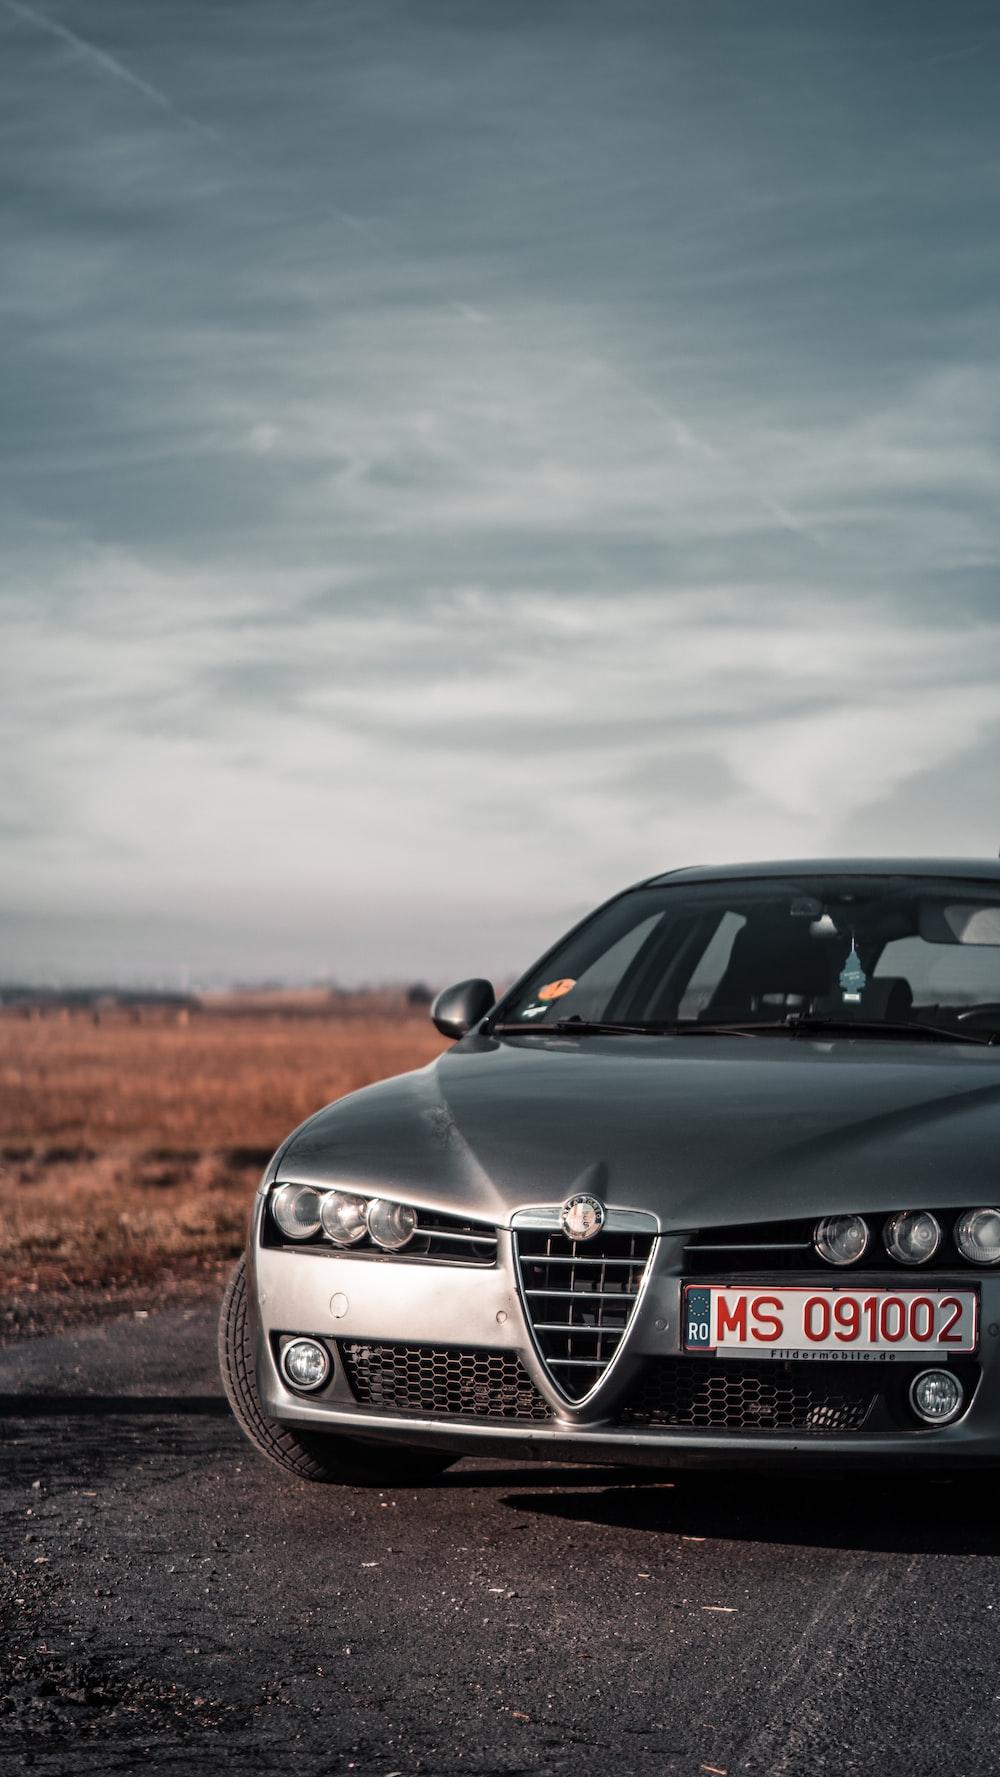 A car parked on the side of the road photo Free Alfa romeo